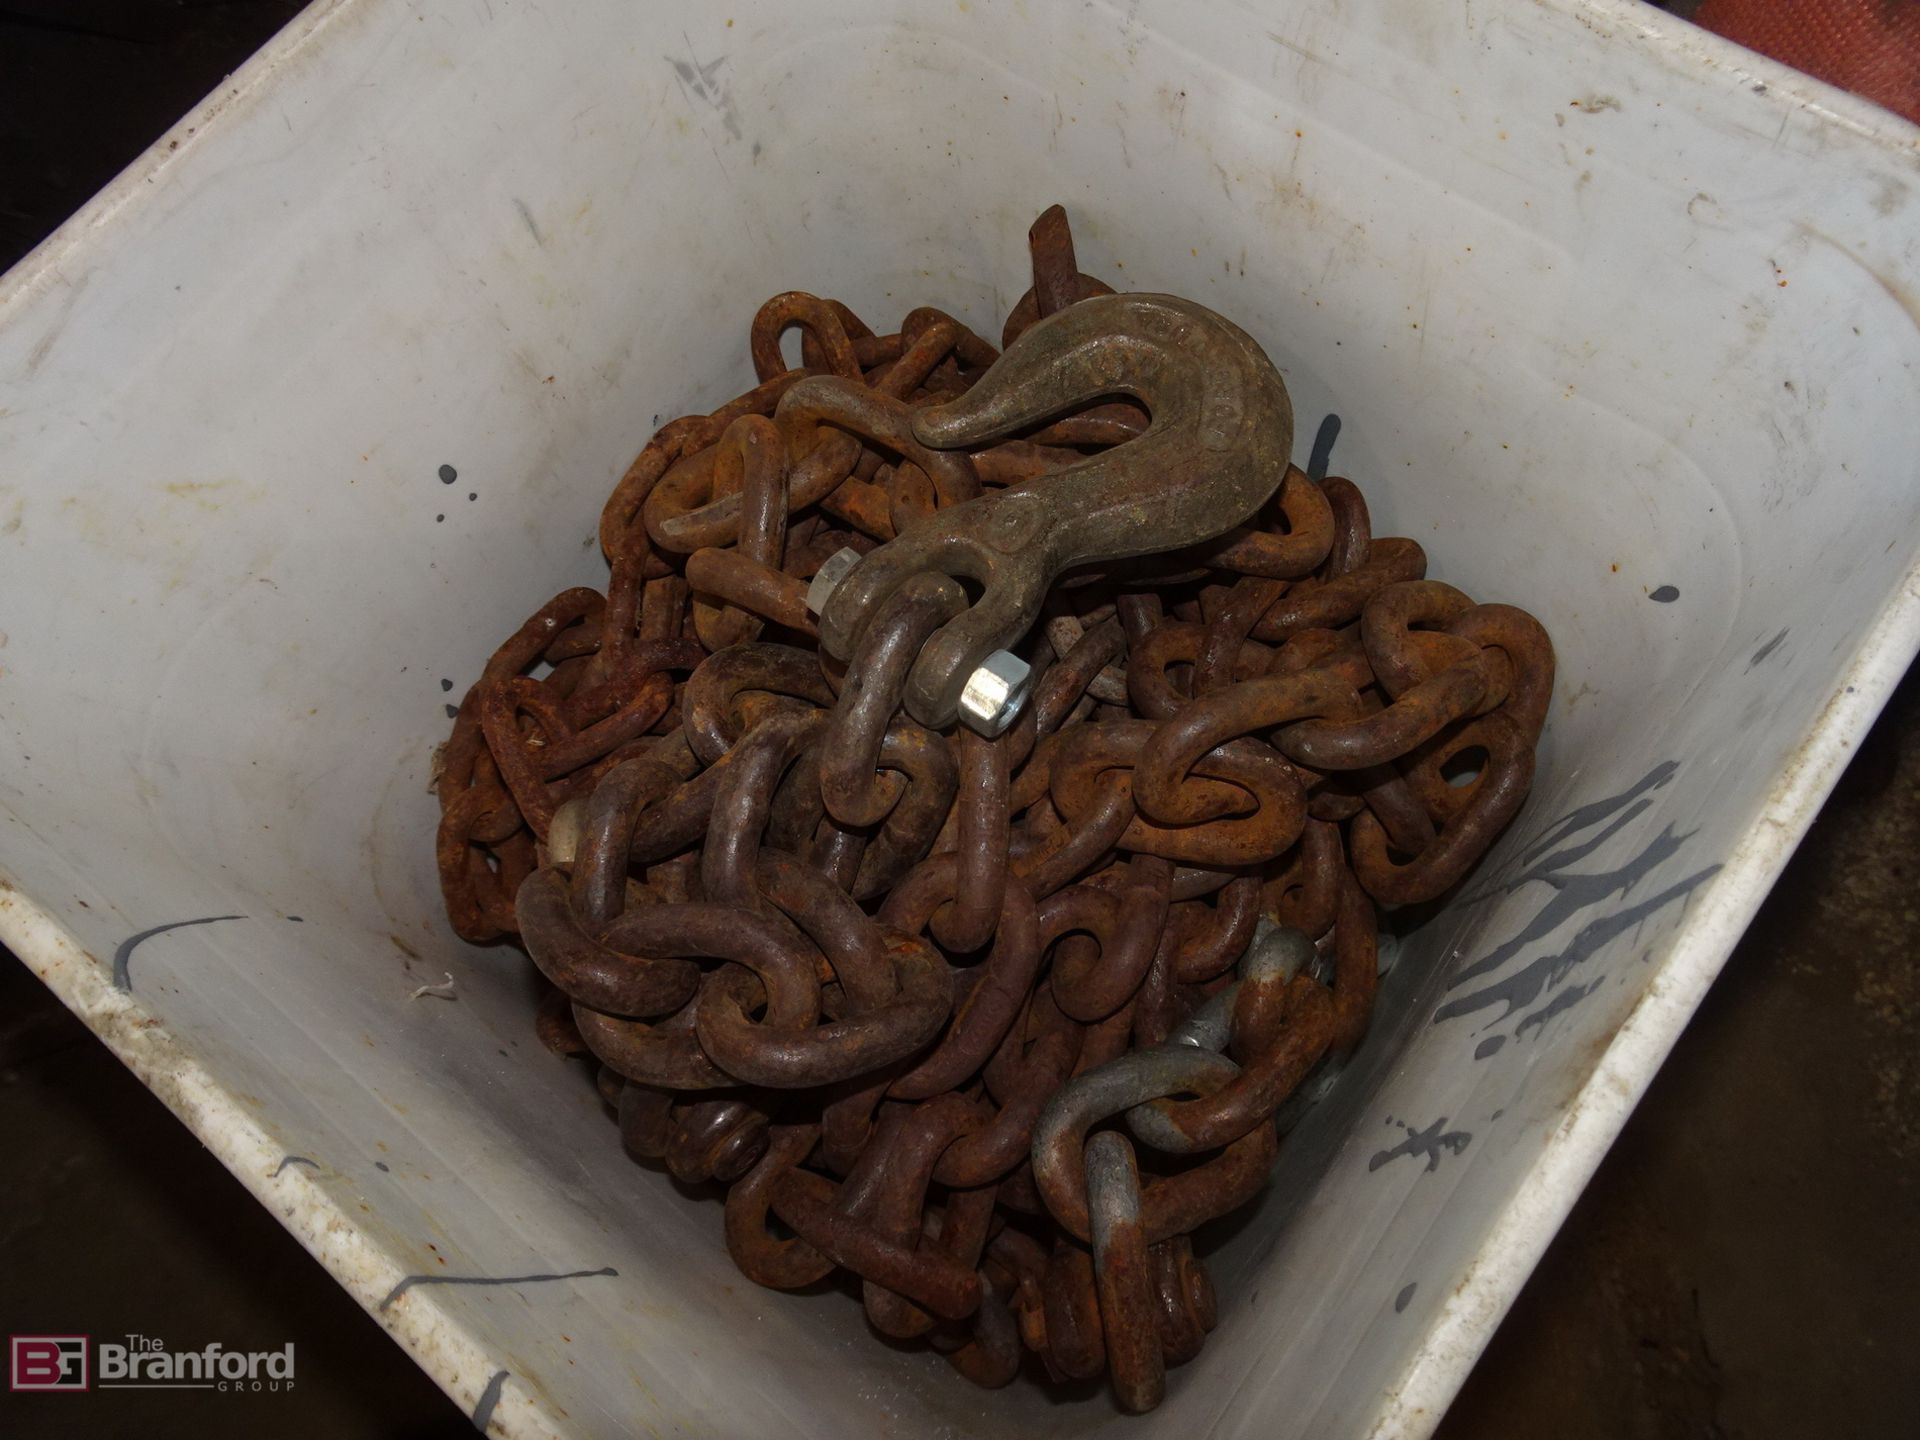 Lot of Lifting Equipment: Shackles; Chain; Straps - Image 4 of 5